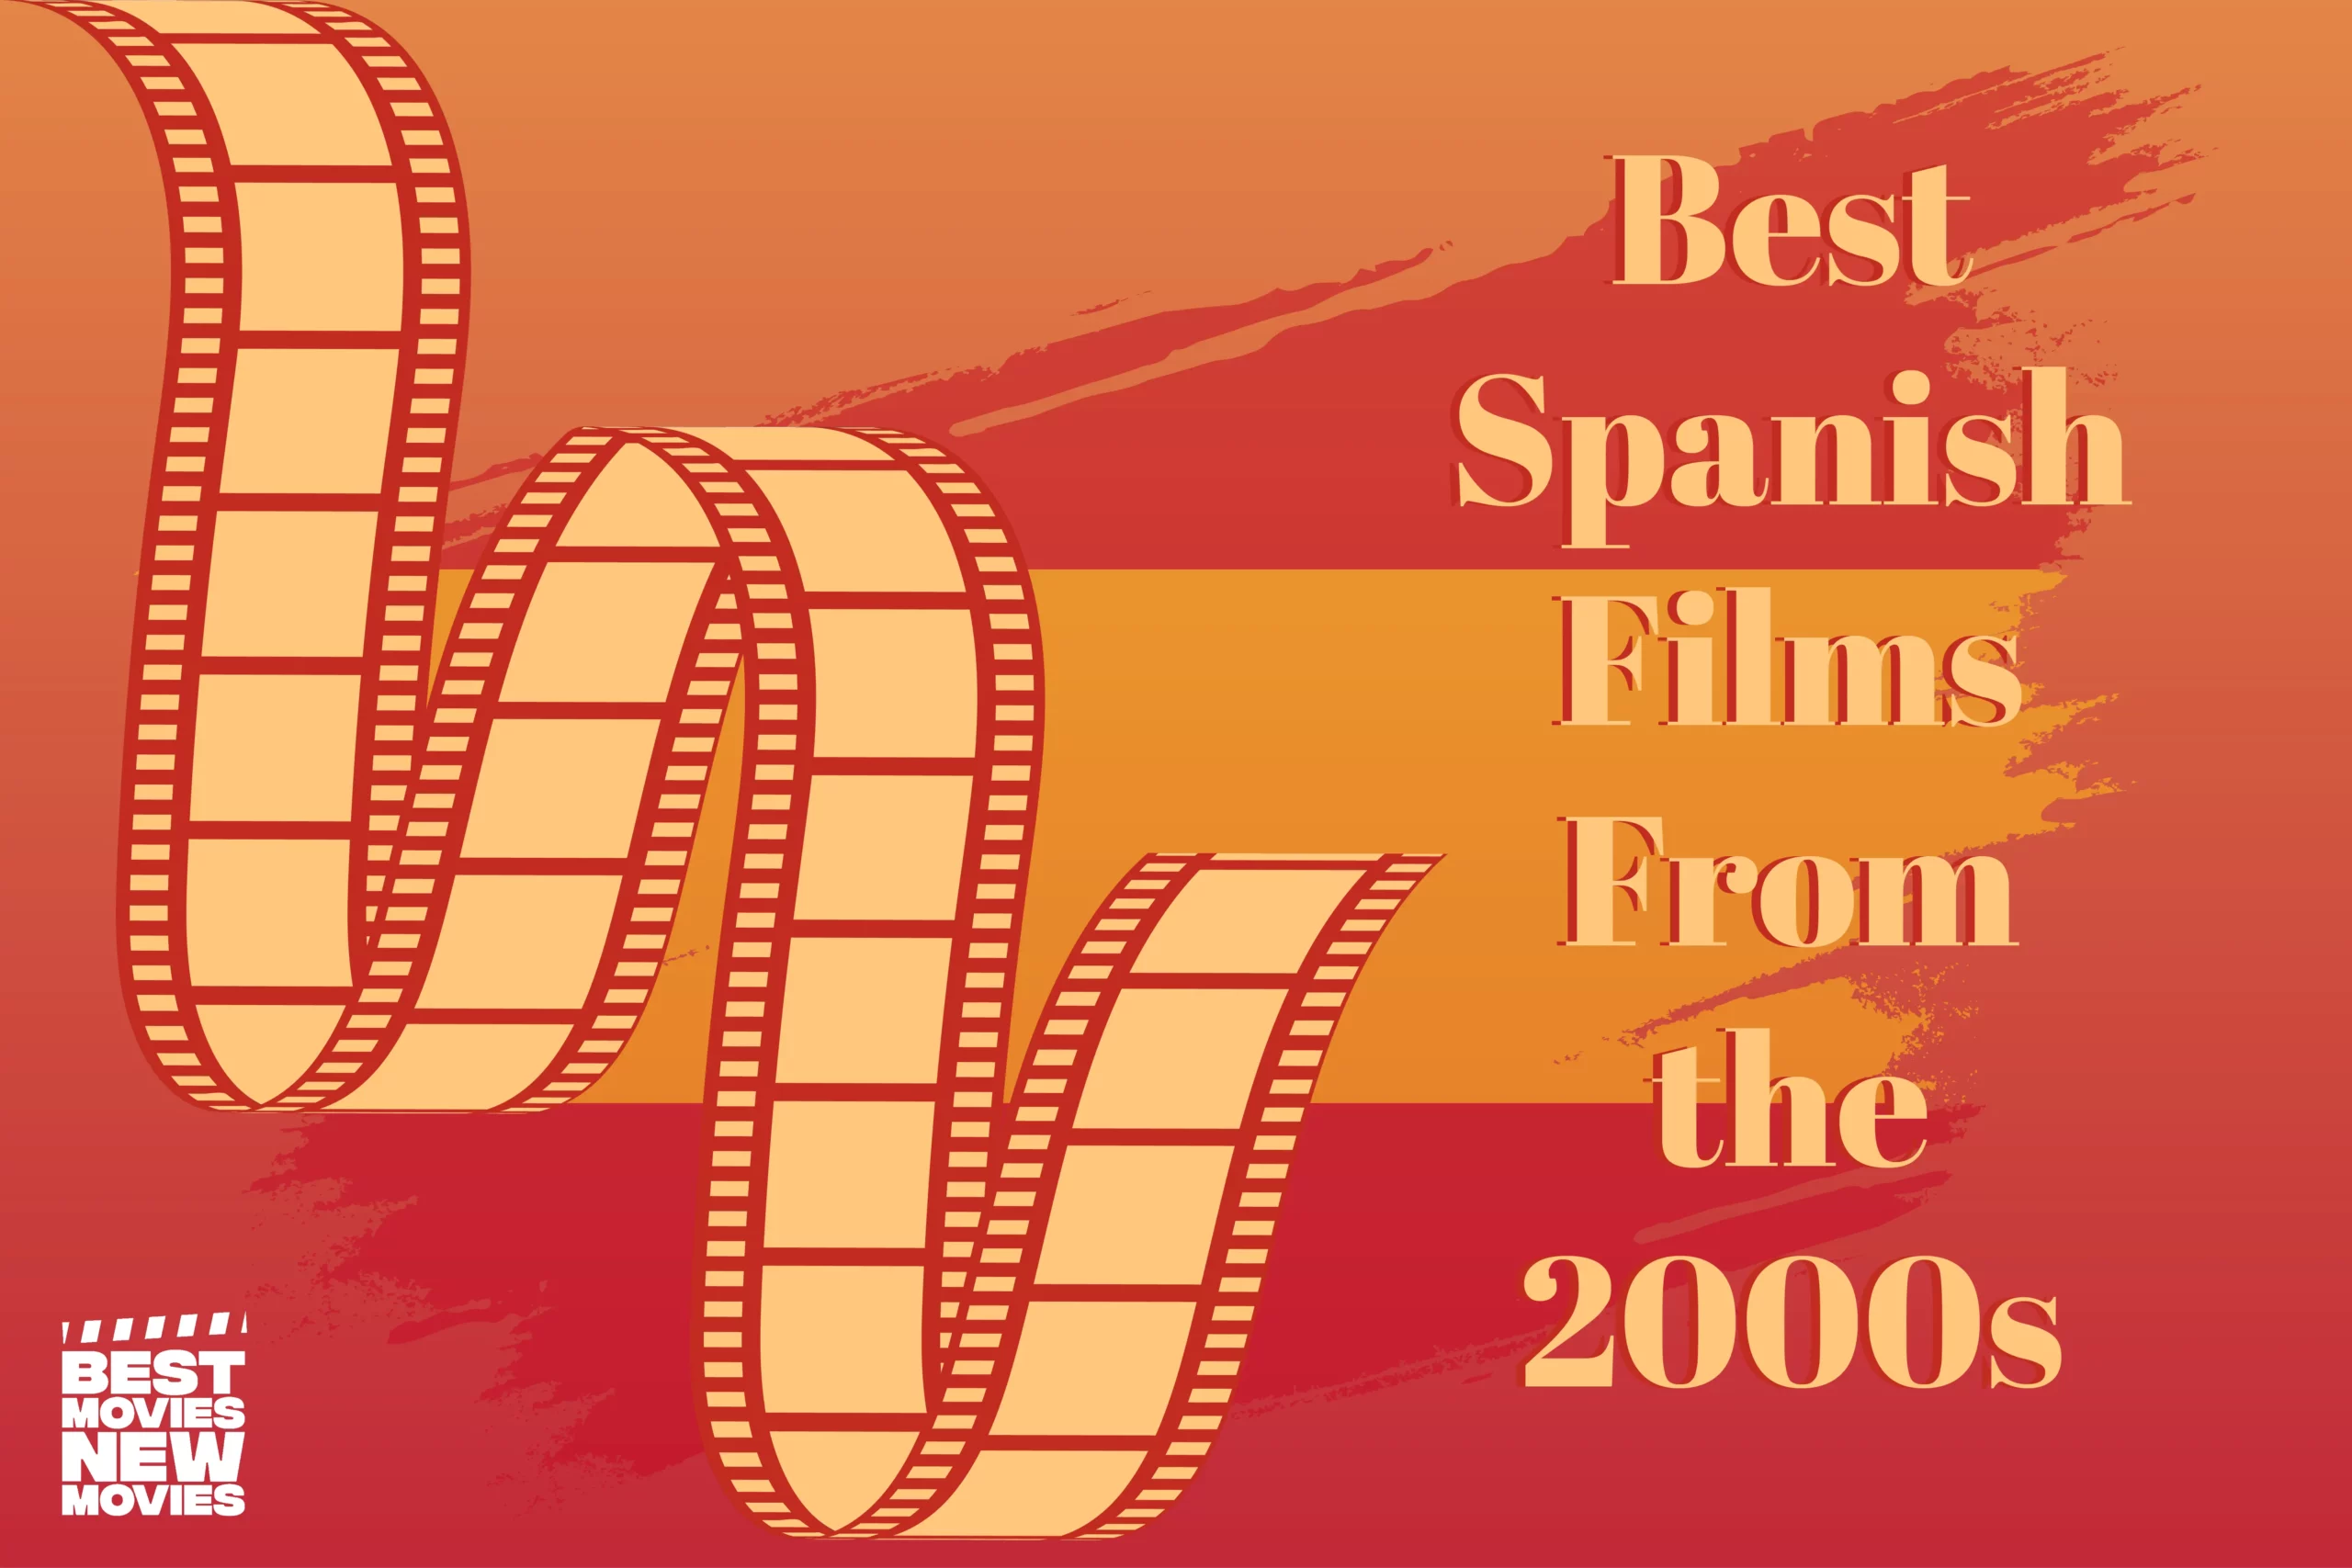 Best Spanish films from the 2000s